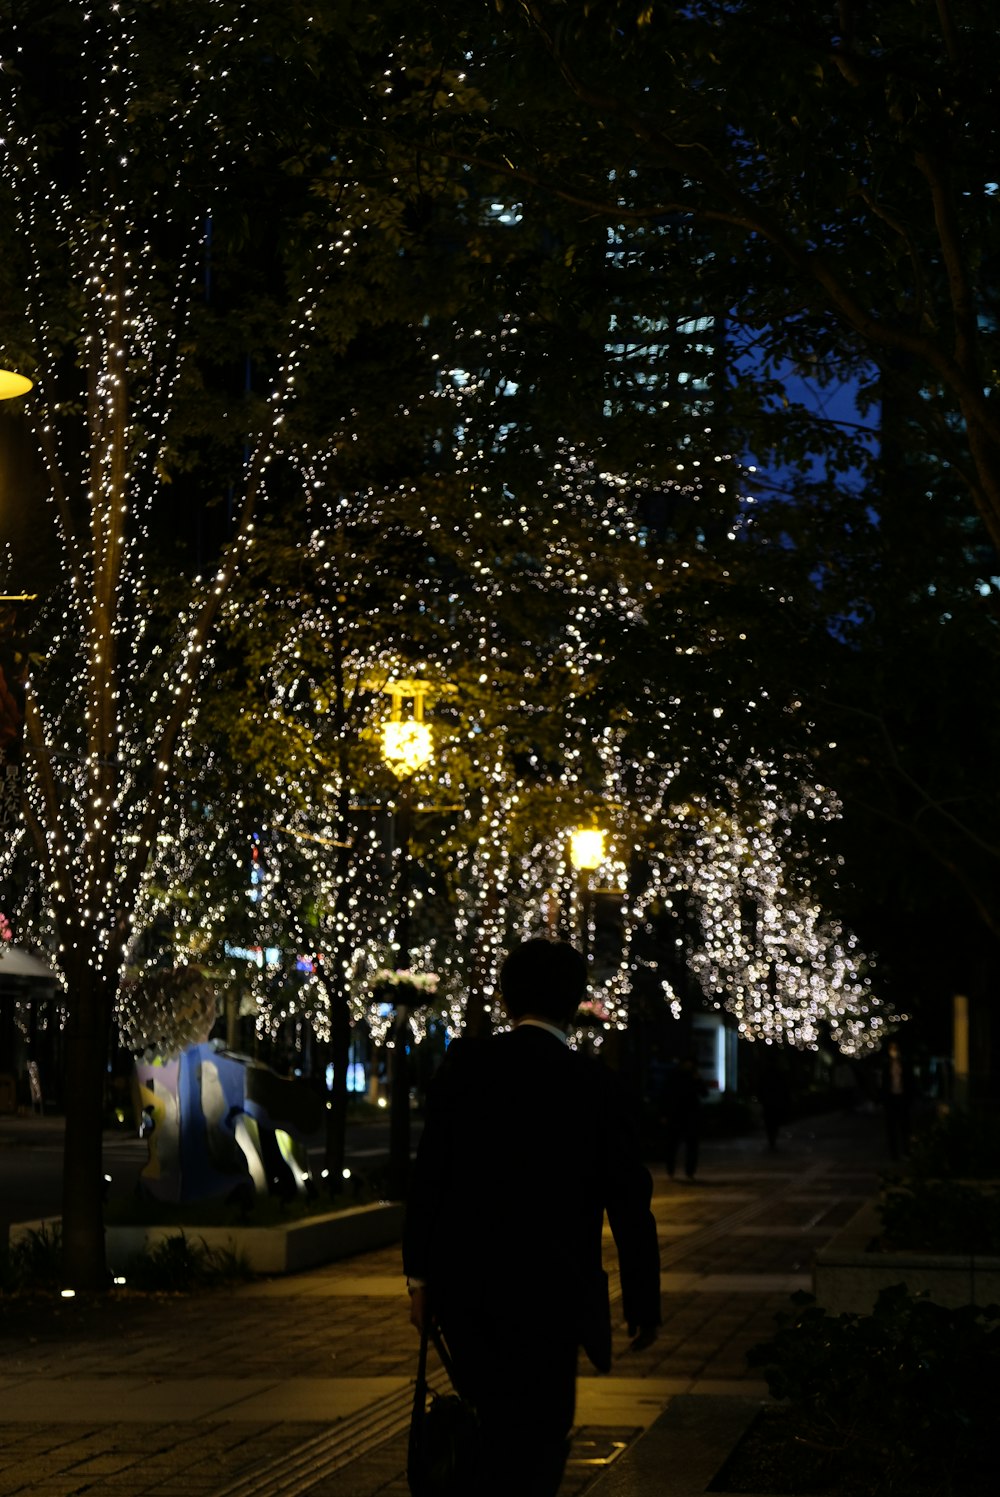 a person walking on a sidewalk with trees with lights